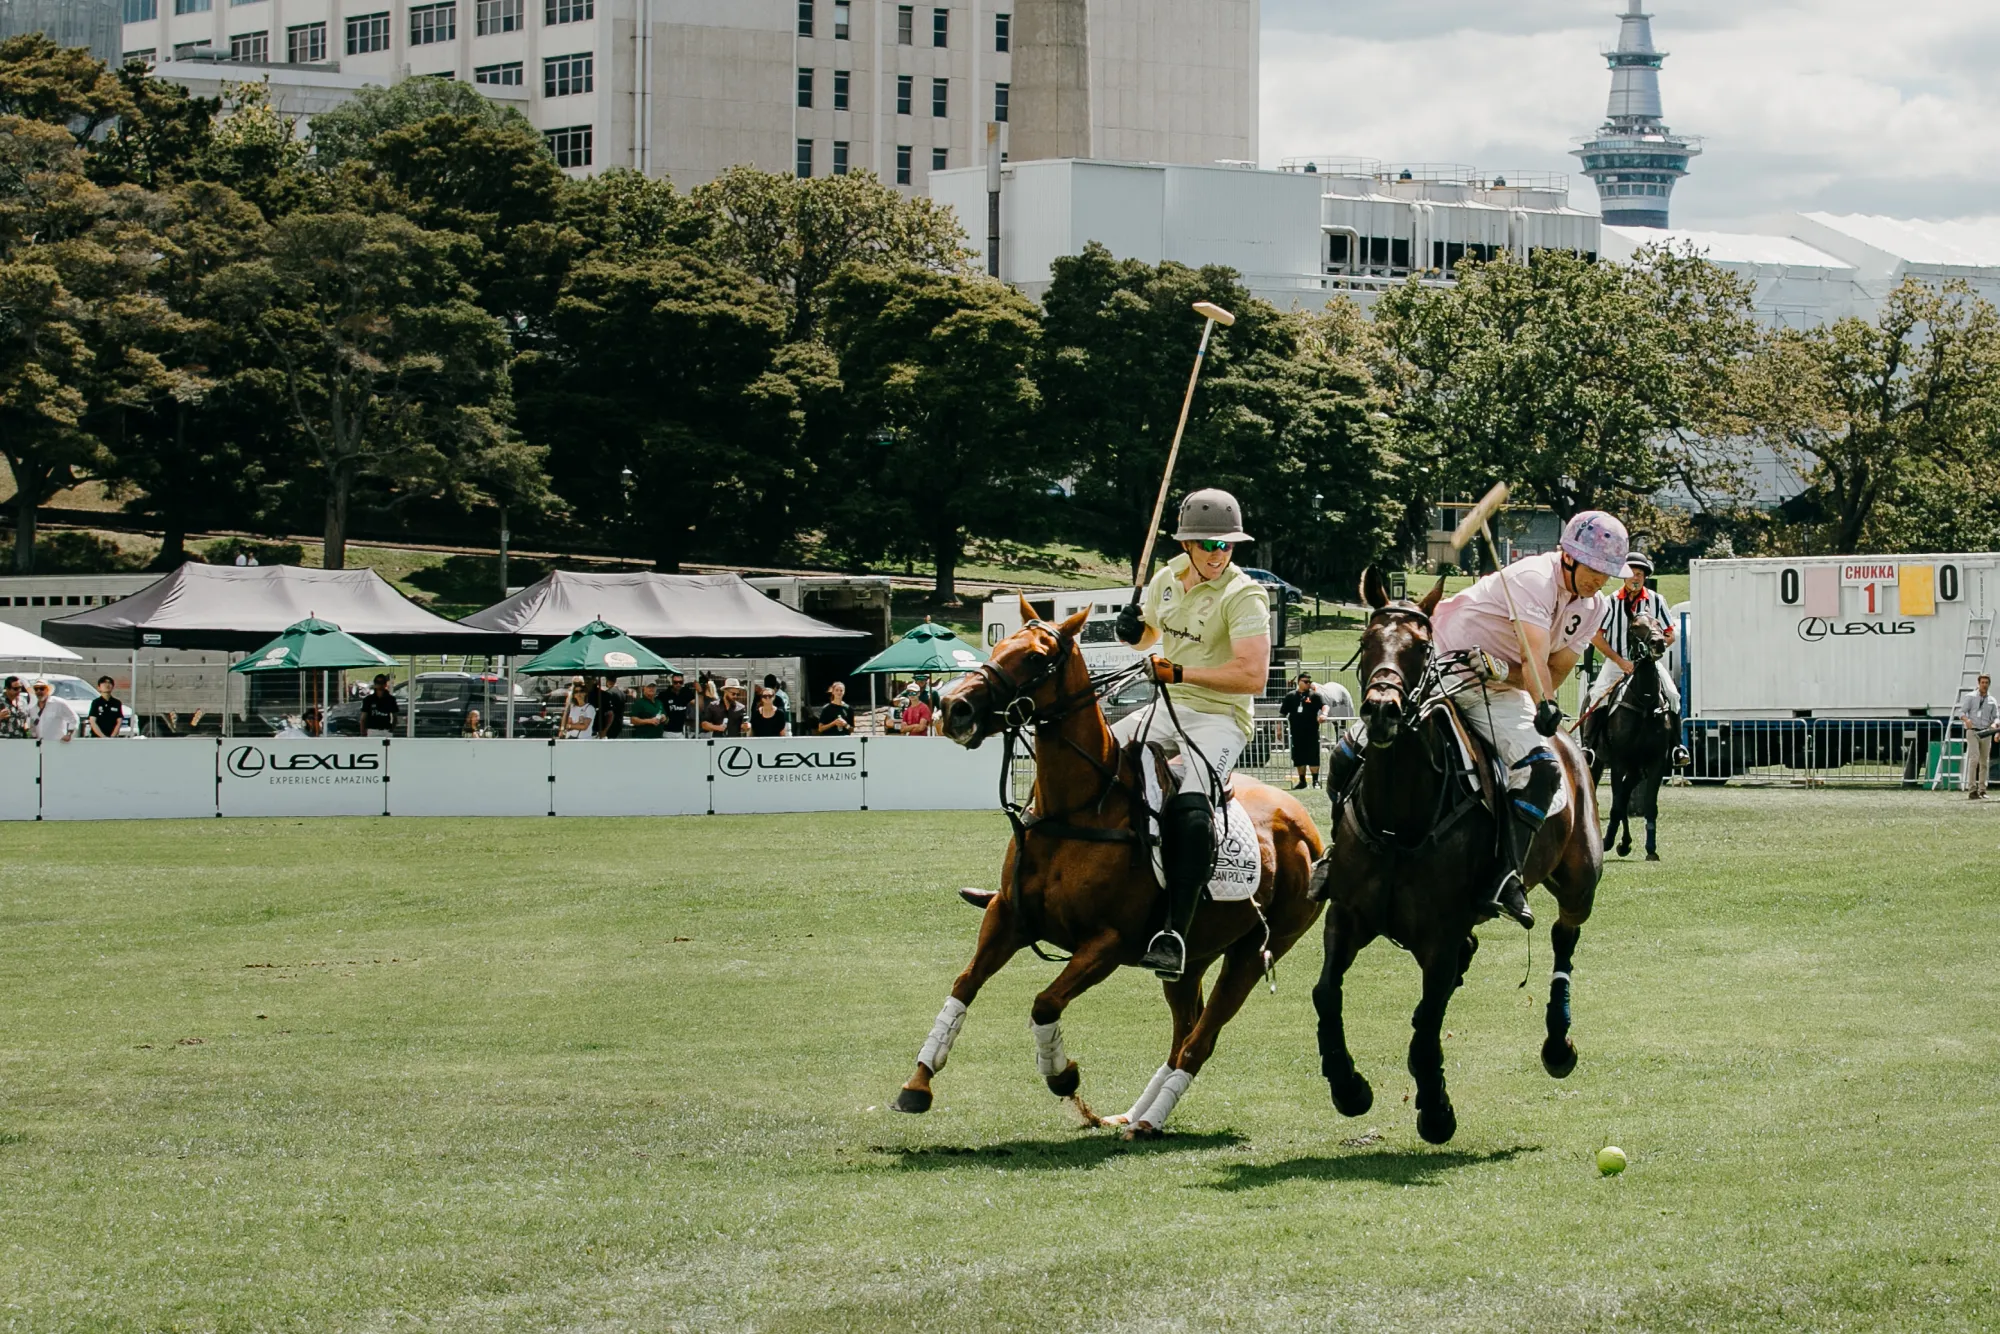 Polo players and horses at Lexus Urban Polo, photo by Sarah Weber Photography